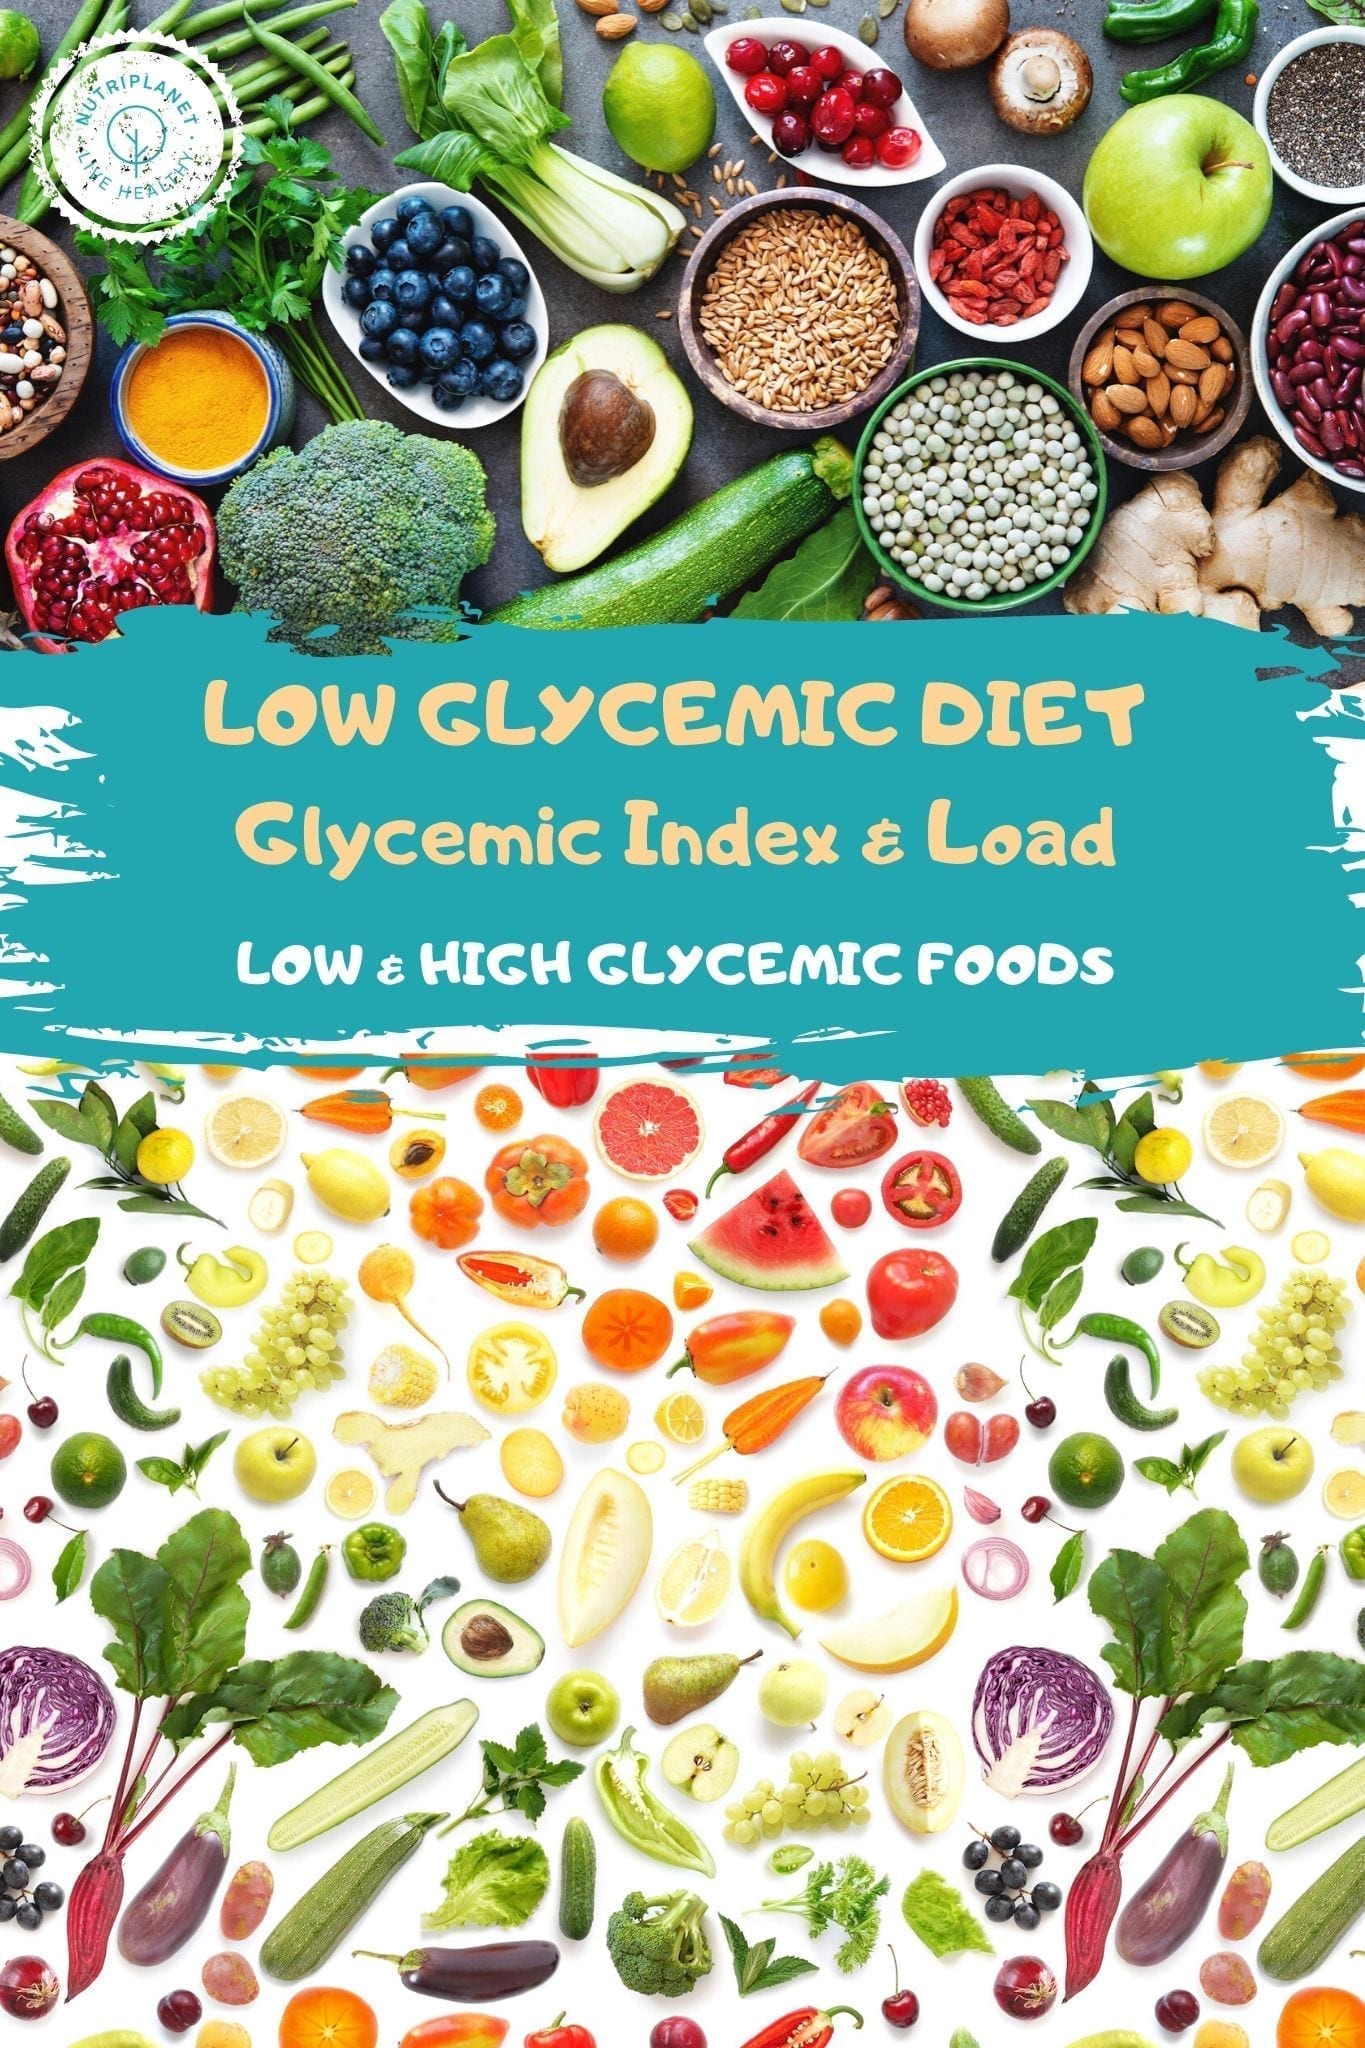 Learn what is low glycemic diet, which are low glycemic foods and high glycemic foods. Read about glycemic index and glycemic load and why those matter.